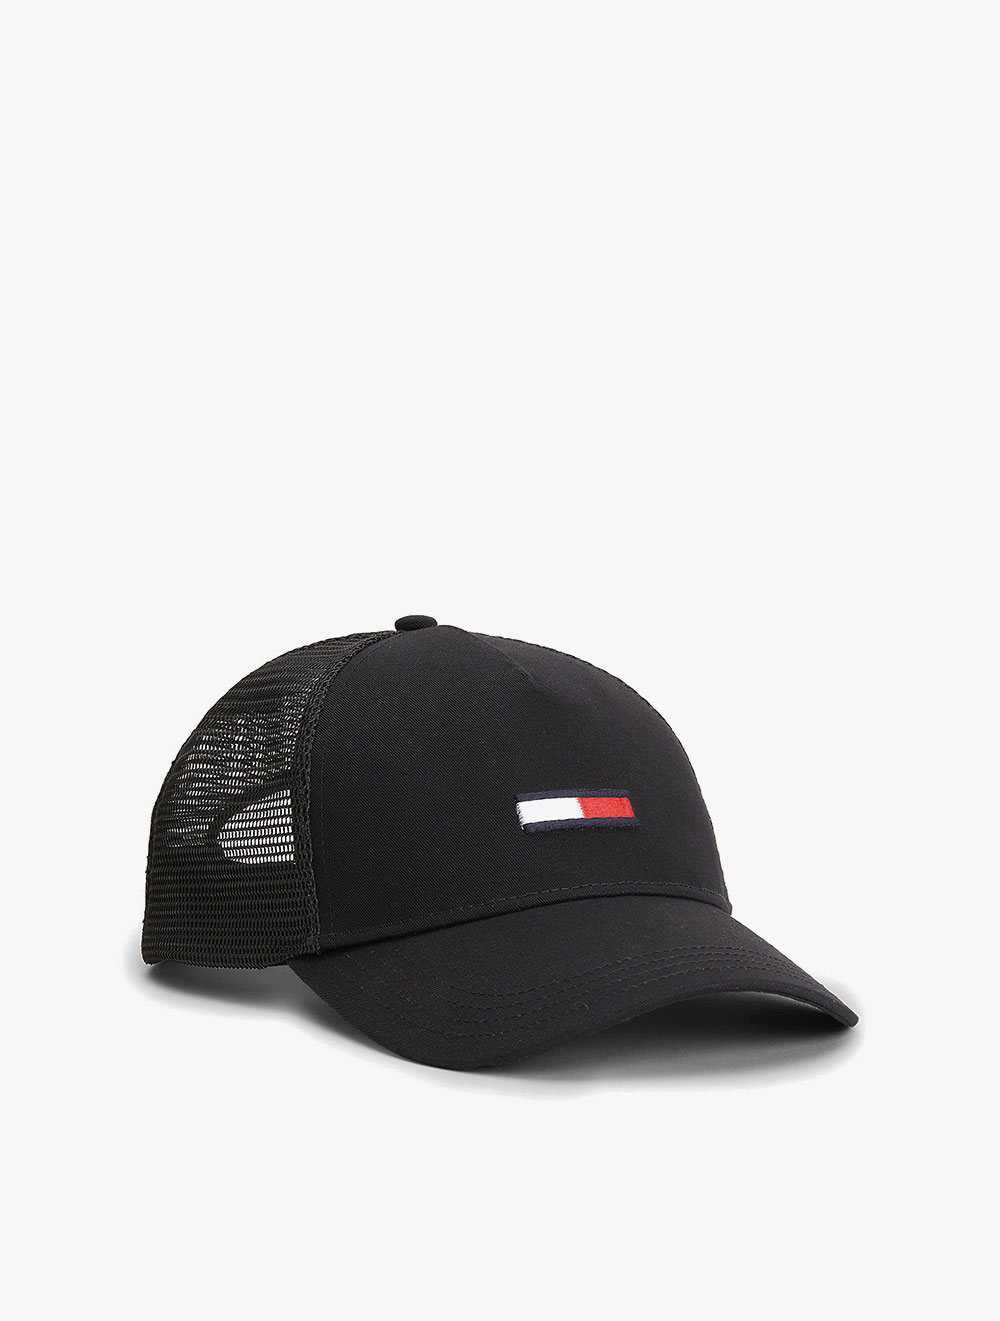 Jeans FLAG BACK EMBROIDERY CAP - TRUCKER MESH Tommy